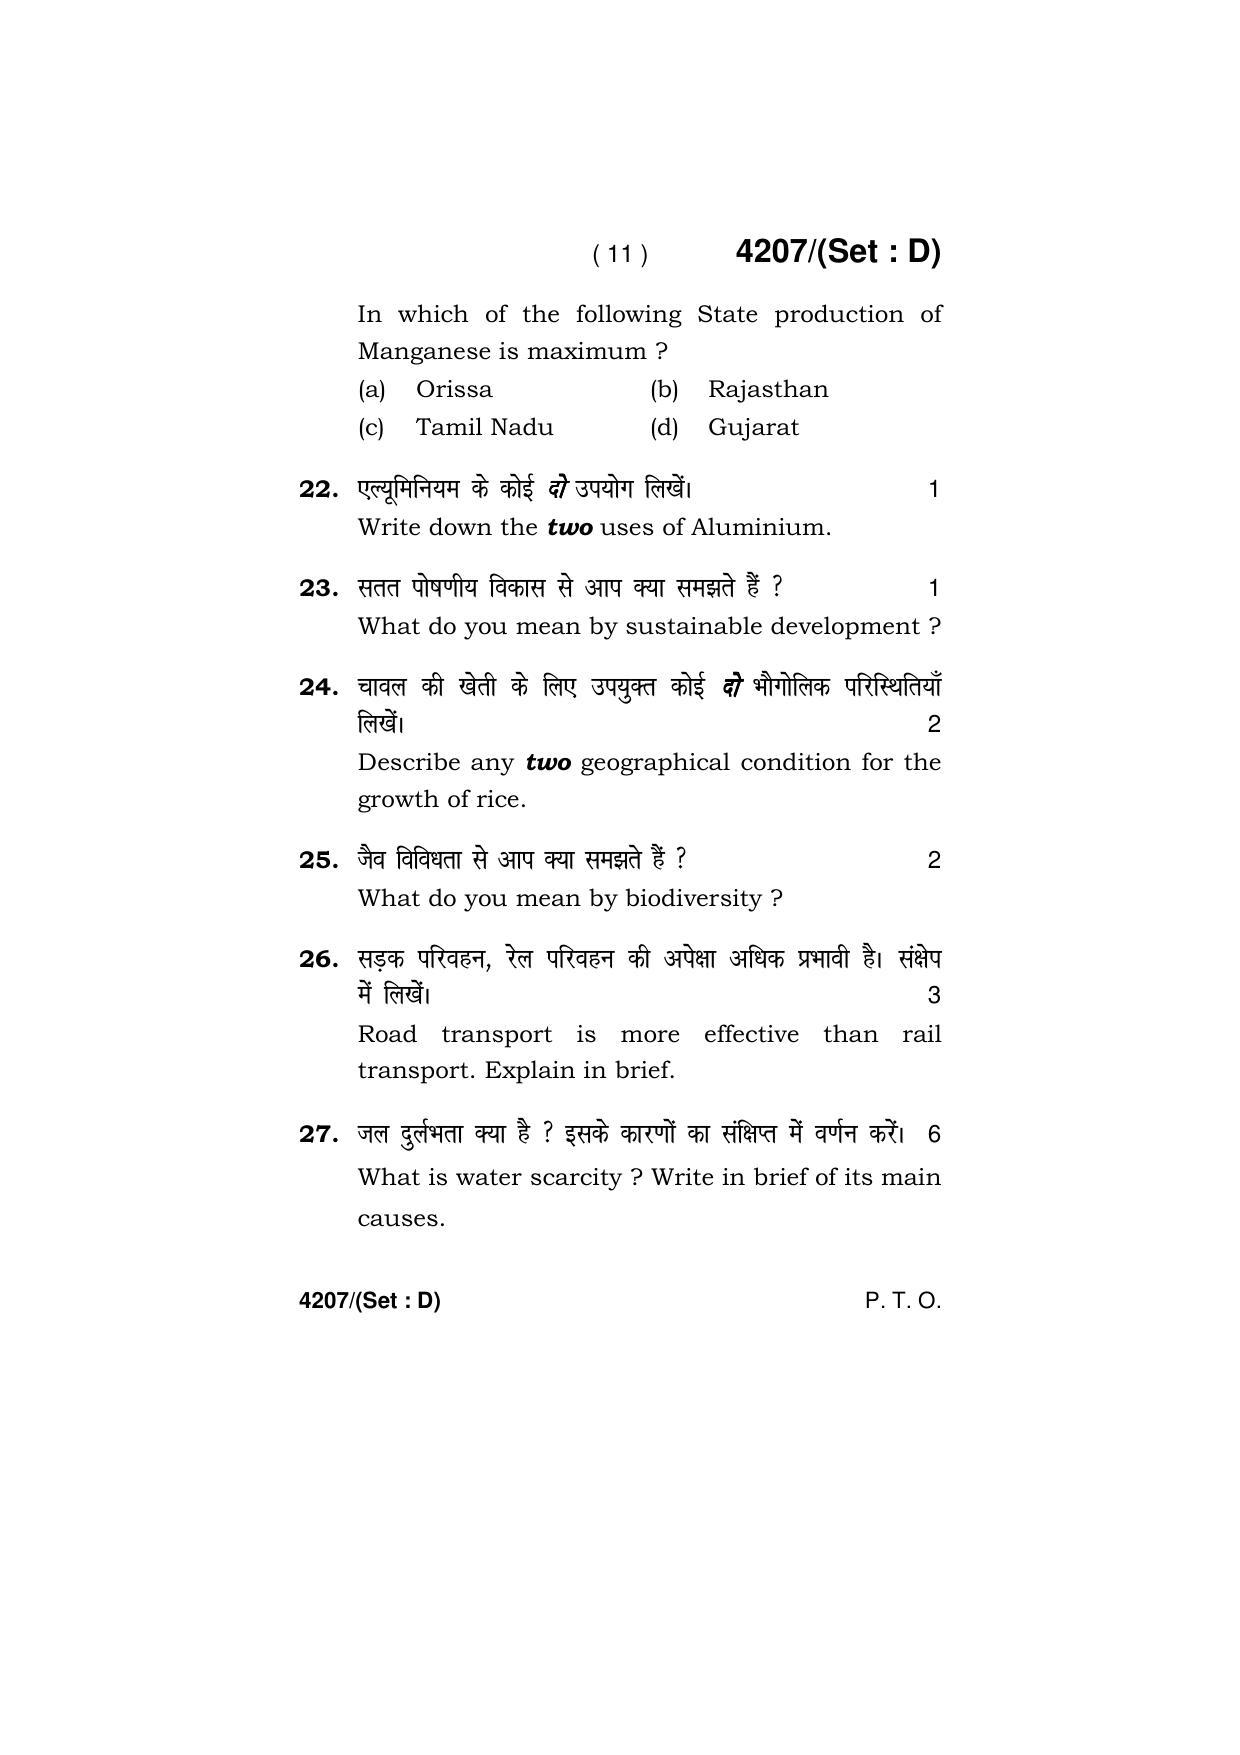 Haryana Board HBSE Class 10 Social Science (All Set) 2019 Question Paper - Page 56